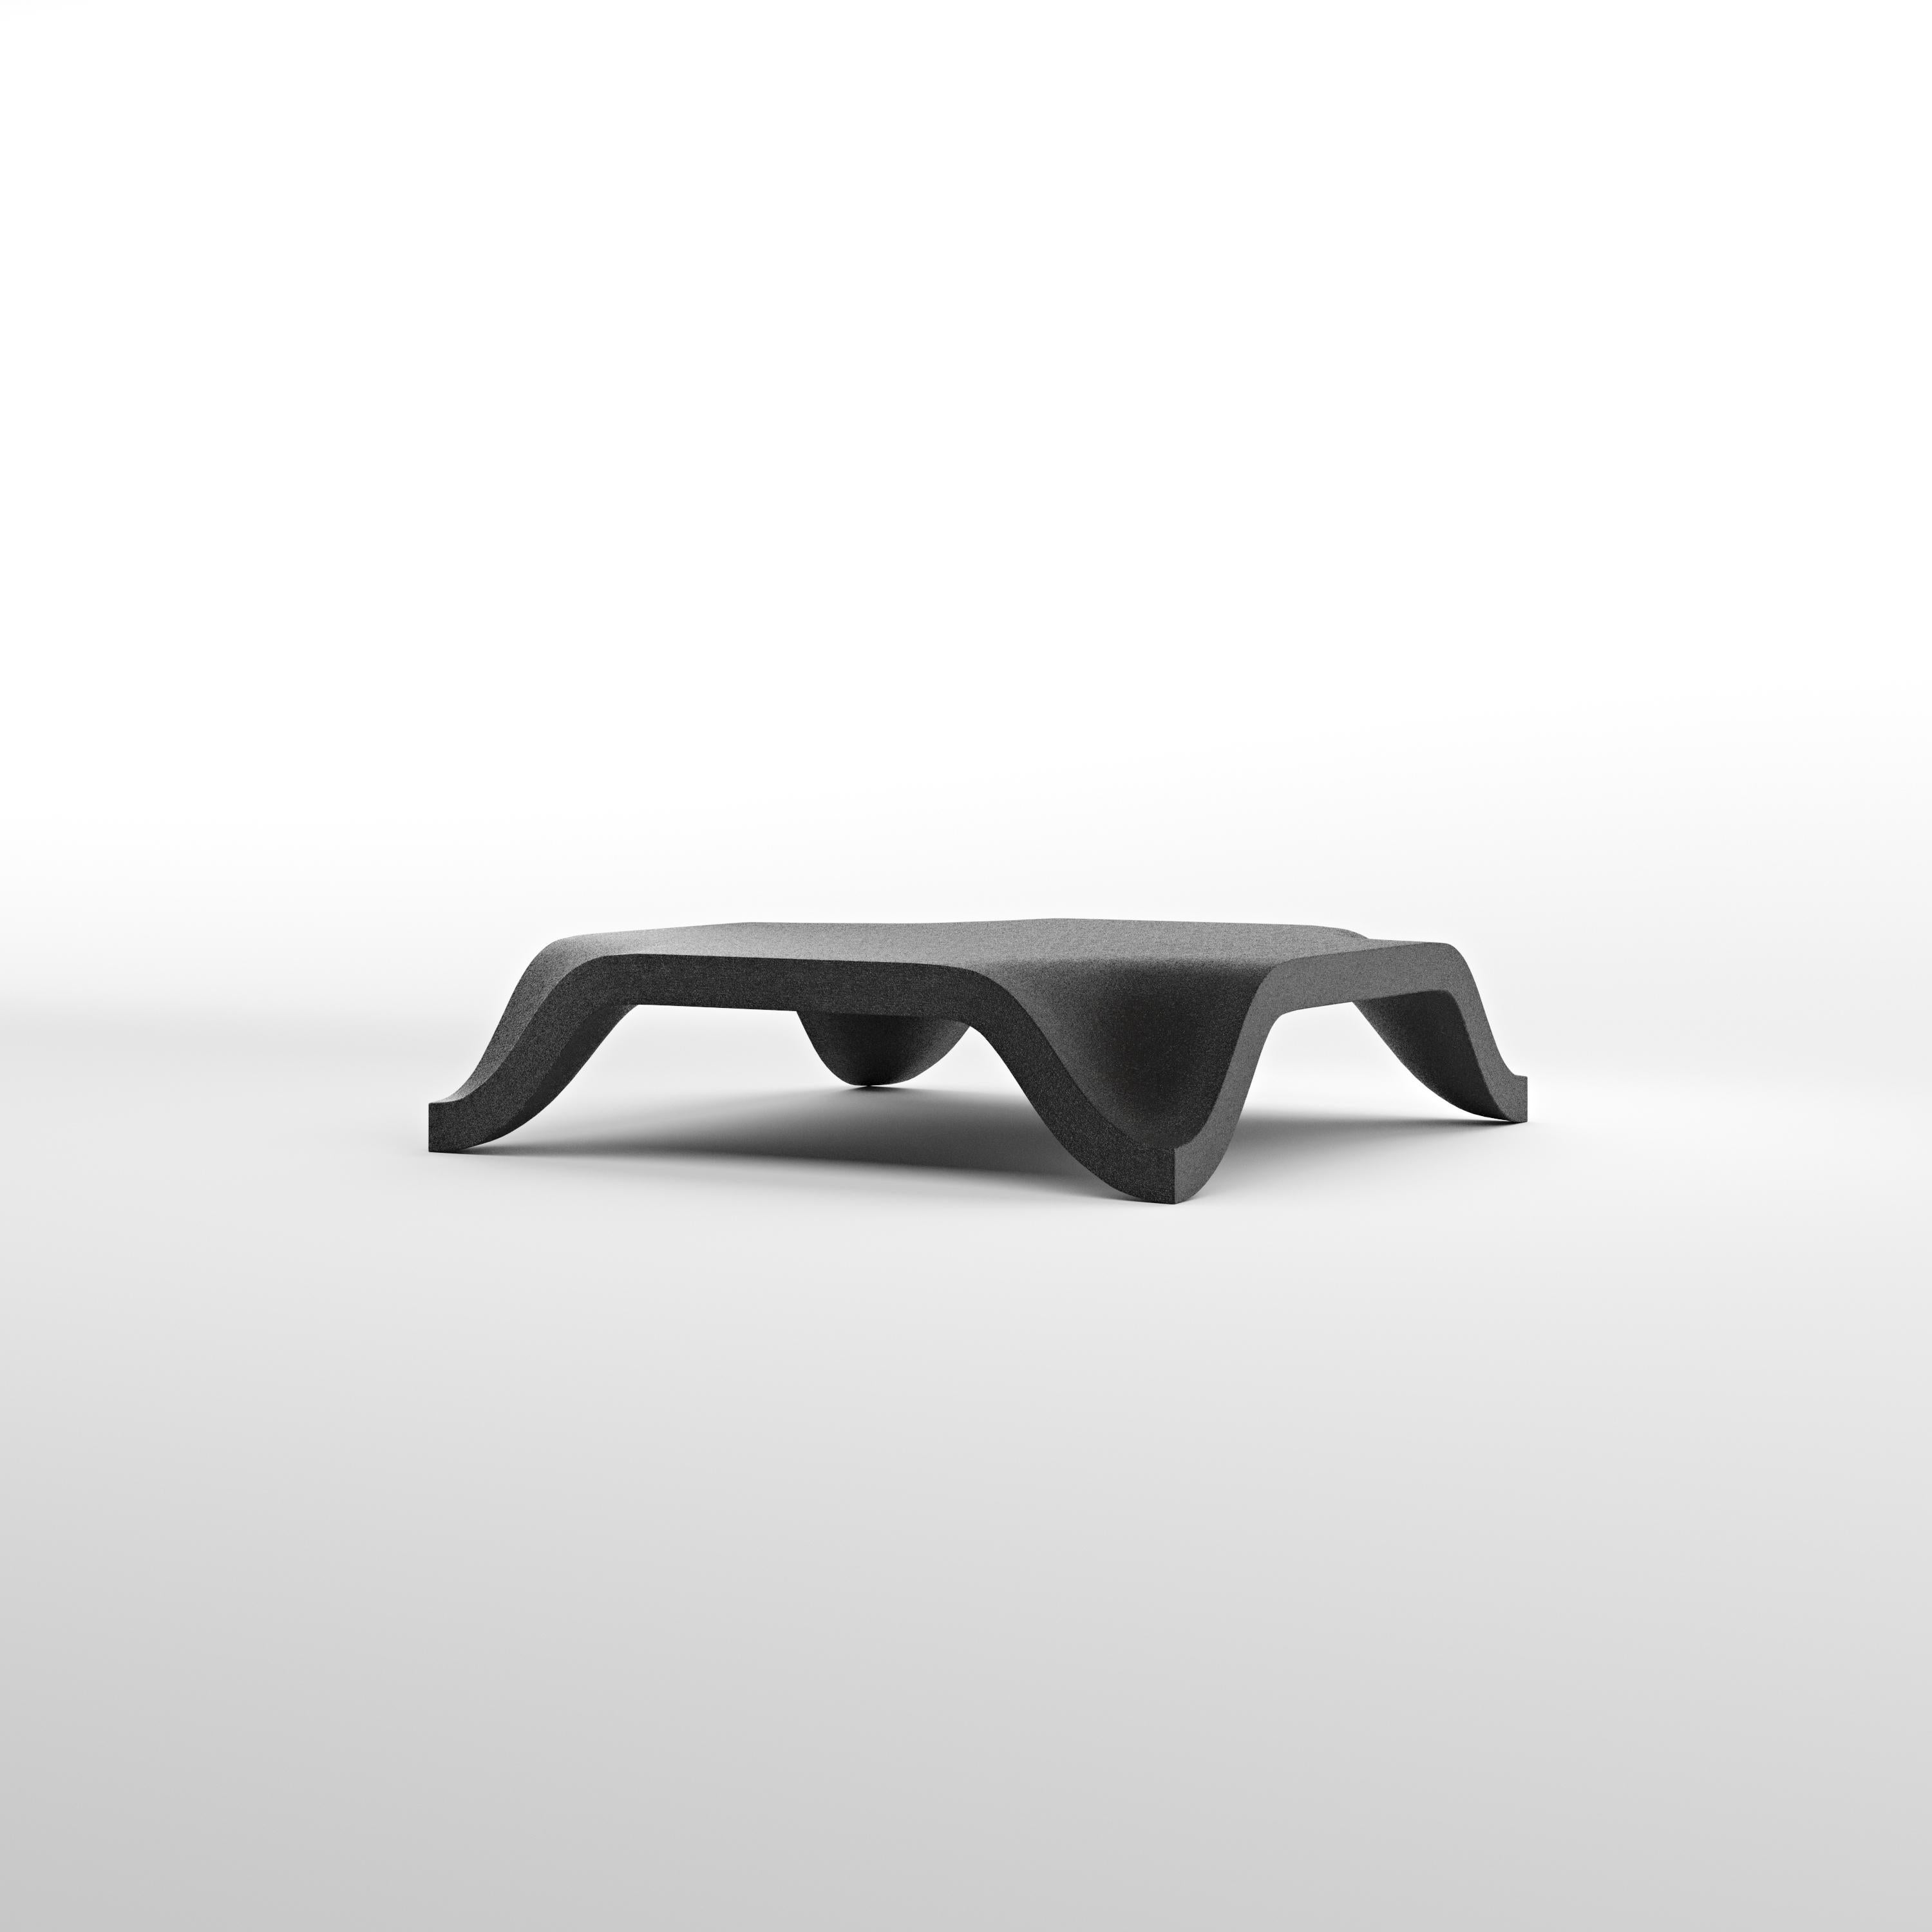 Made-to-order
Contourage quartz sand
Coffee table by Johan Wilén

The Swedish designer's latest striking creation—a console table like no other. Utilising innovative 3D printing technology and quartz sand, intertwining organic forms and the rugged